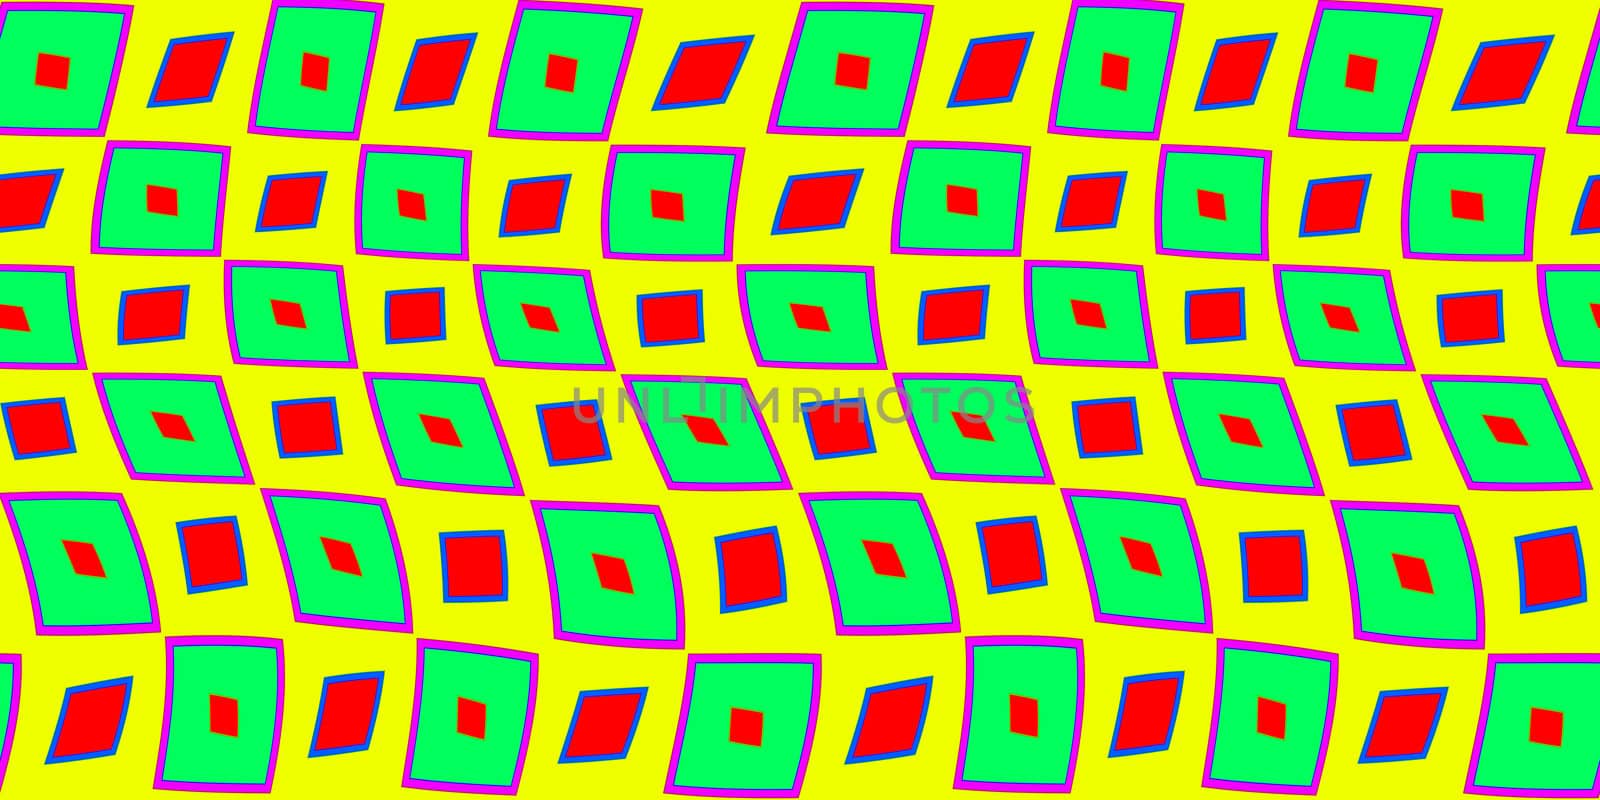 texture of vivid red and green square shapes on yellow